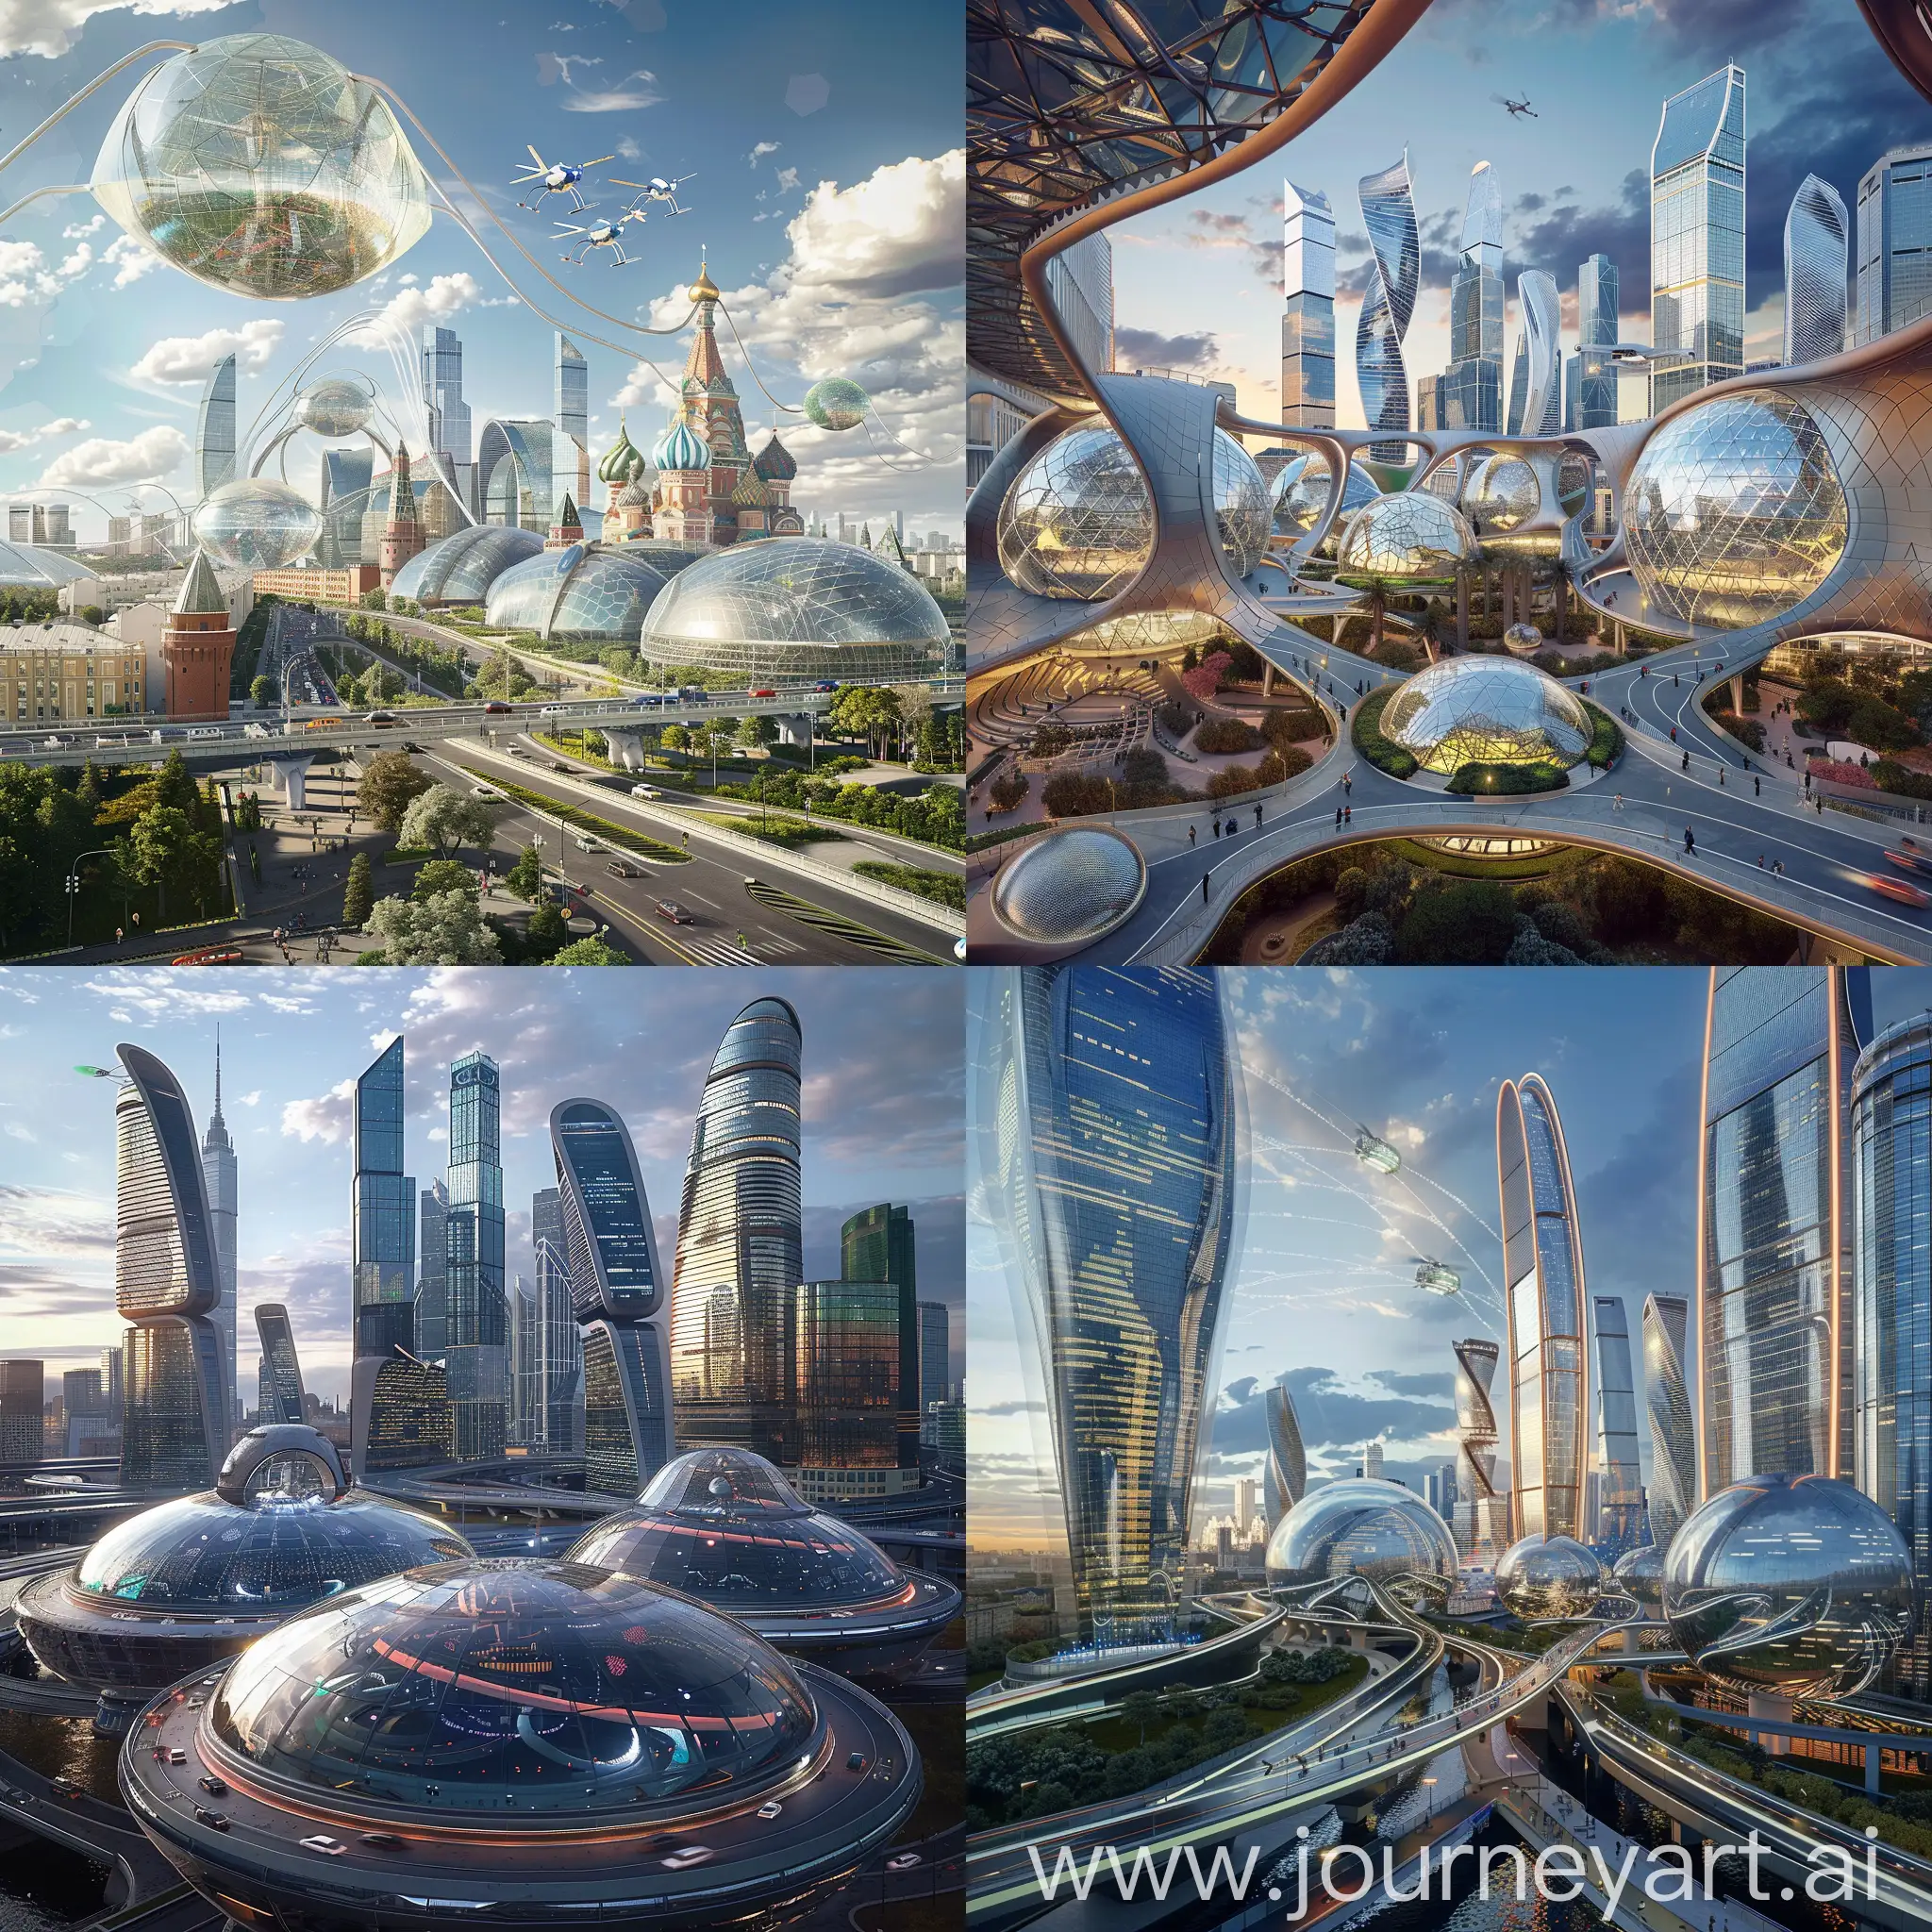 Futuristic-Moscow-with-Aerodynamic-Domes-and-Hyperloop-Transit-Systems